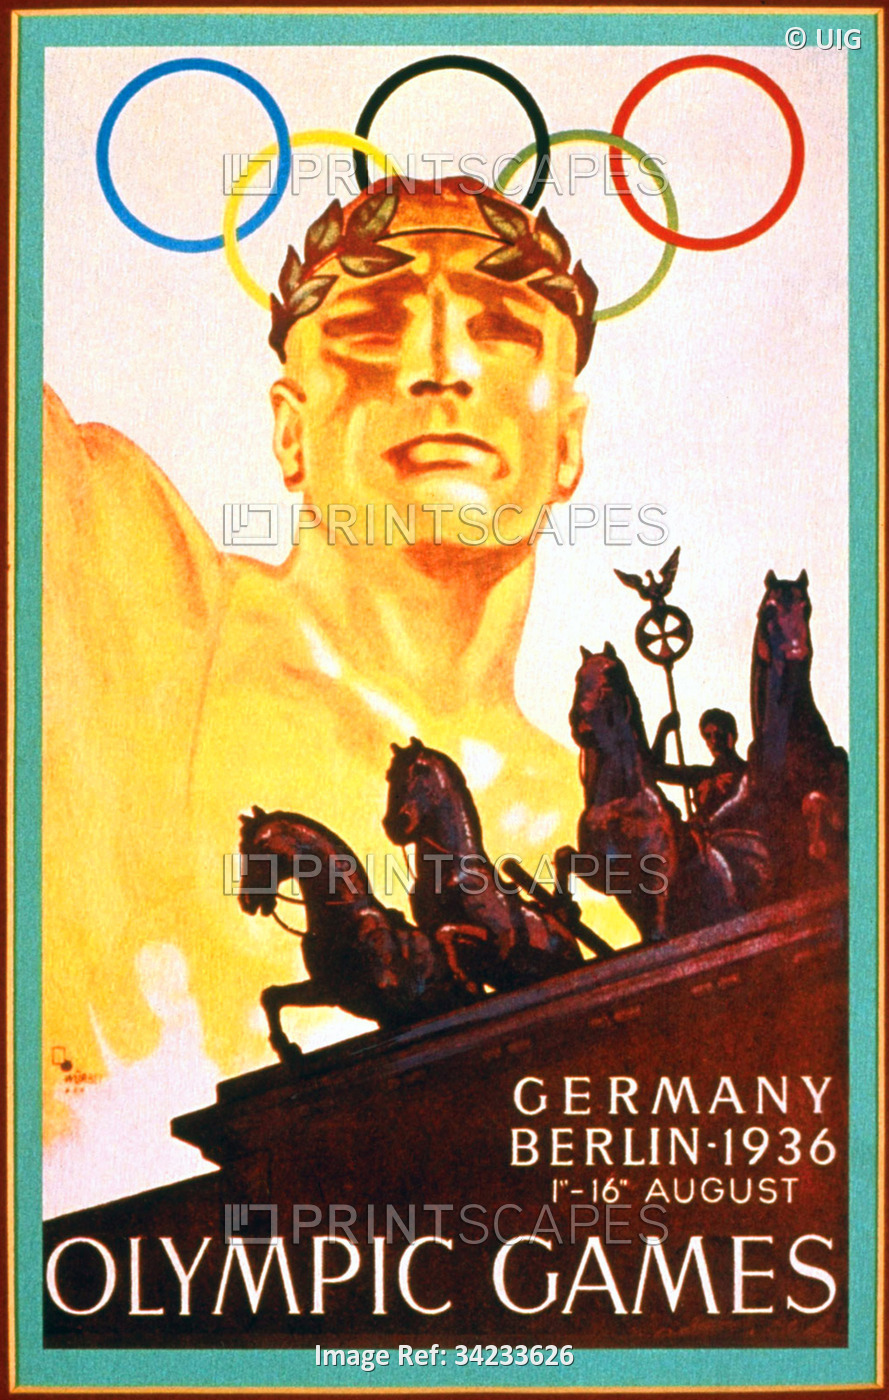 Germany: Poster for the 1936 Olympic Games in Berlin featuring the Brandenburg Gate quadriga, c. 193